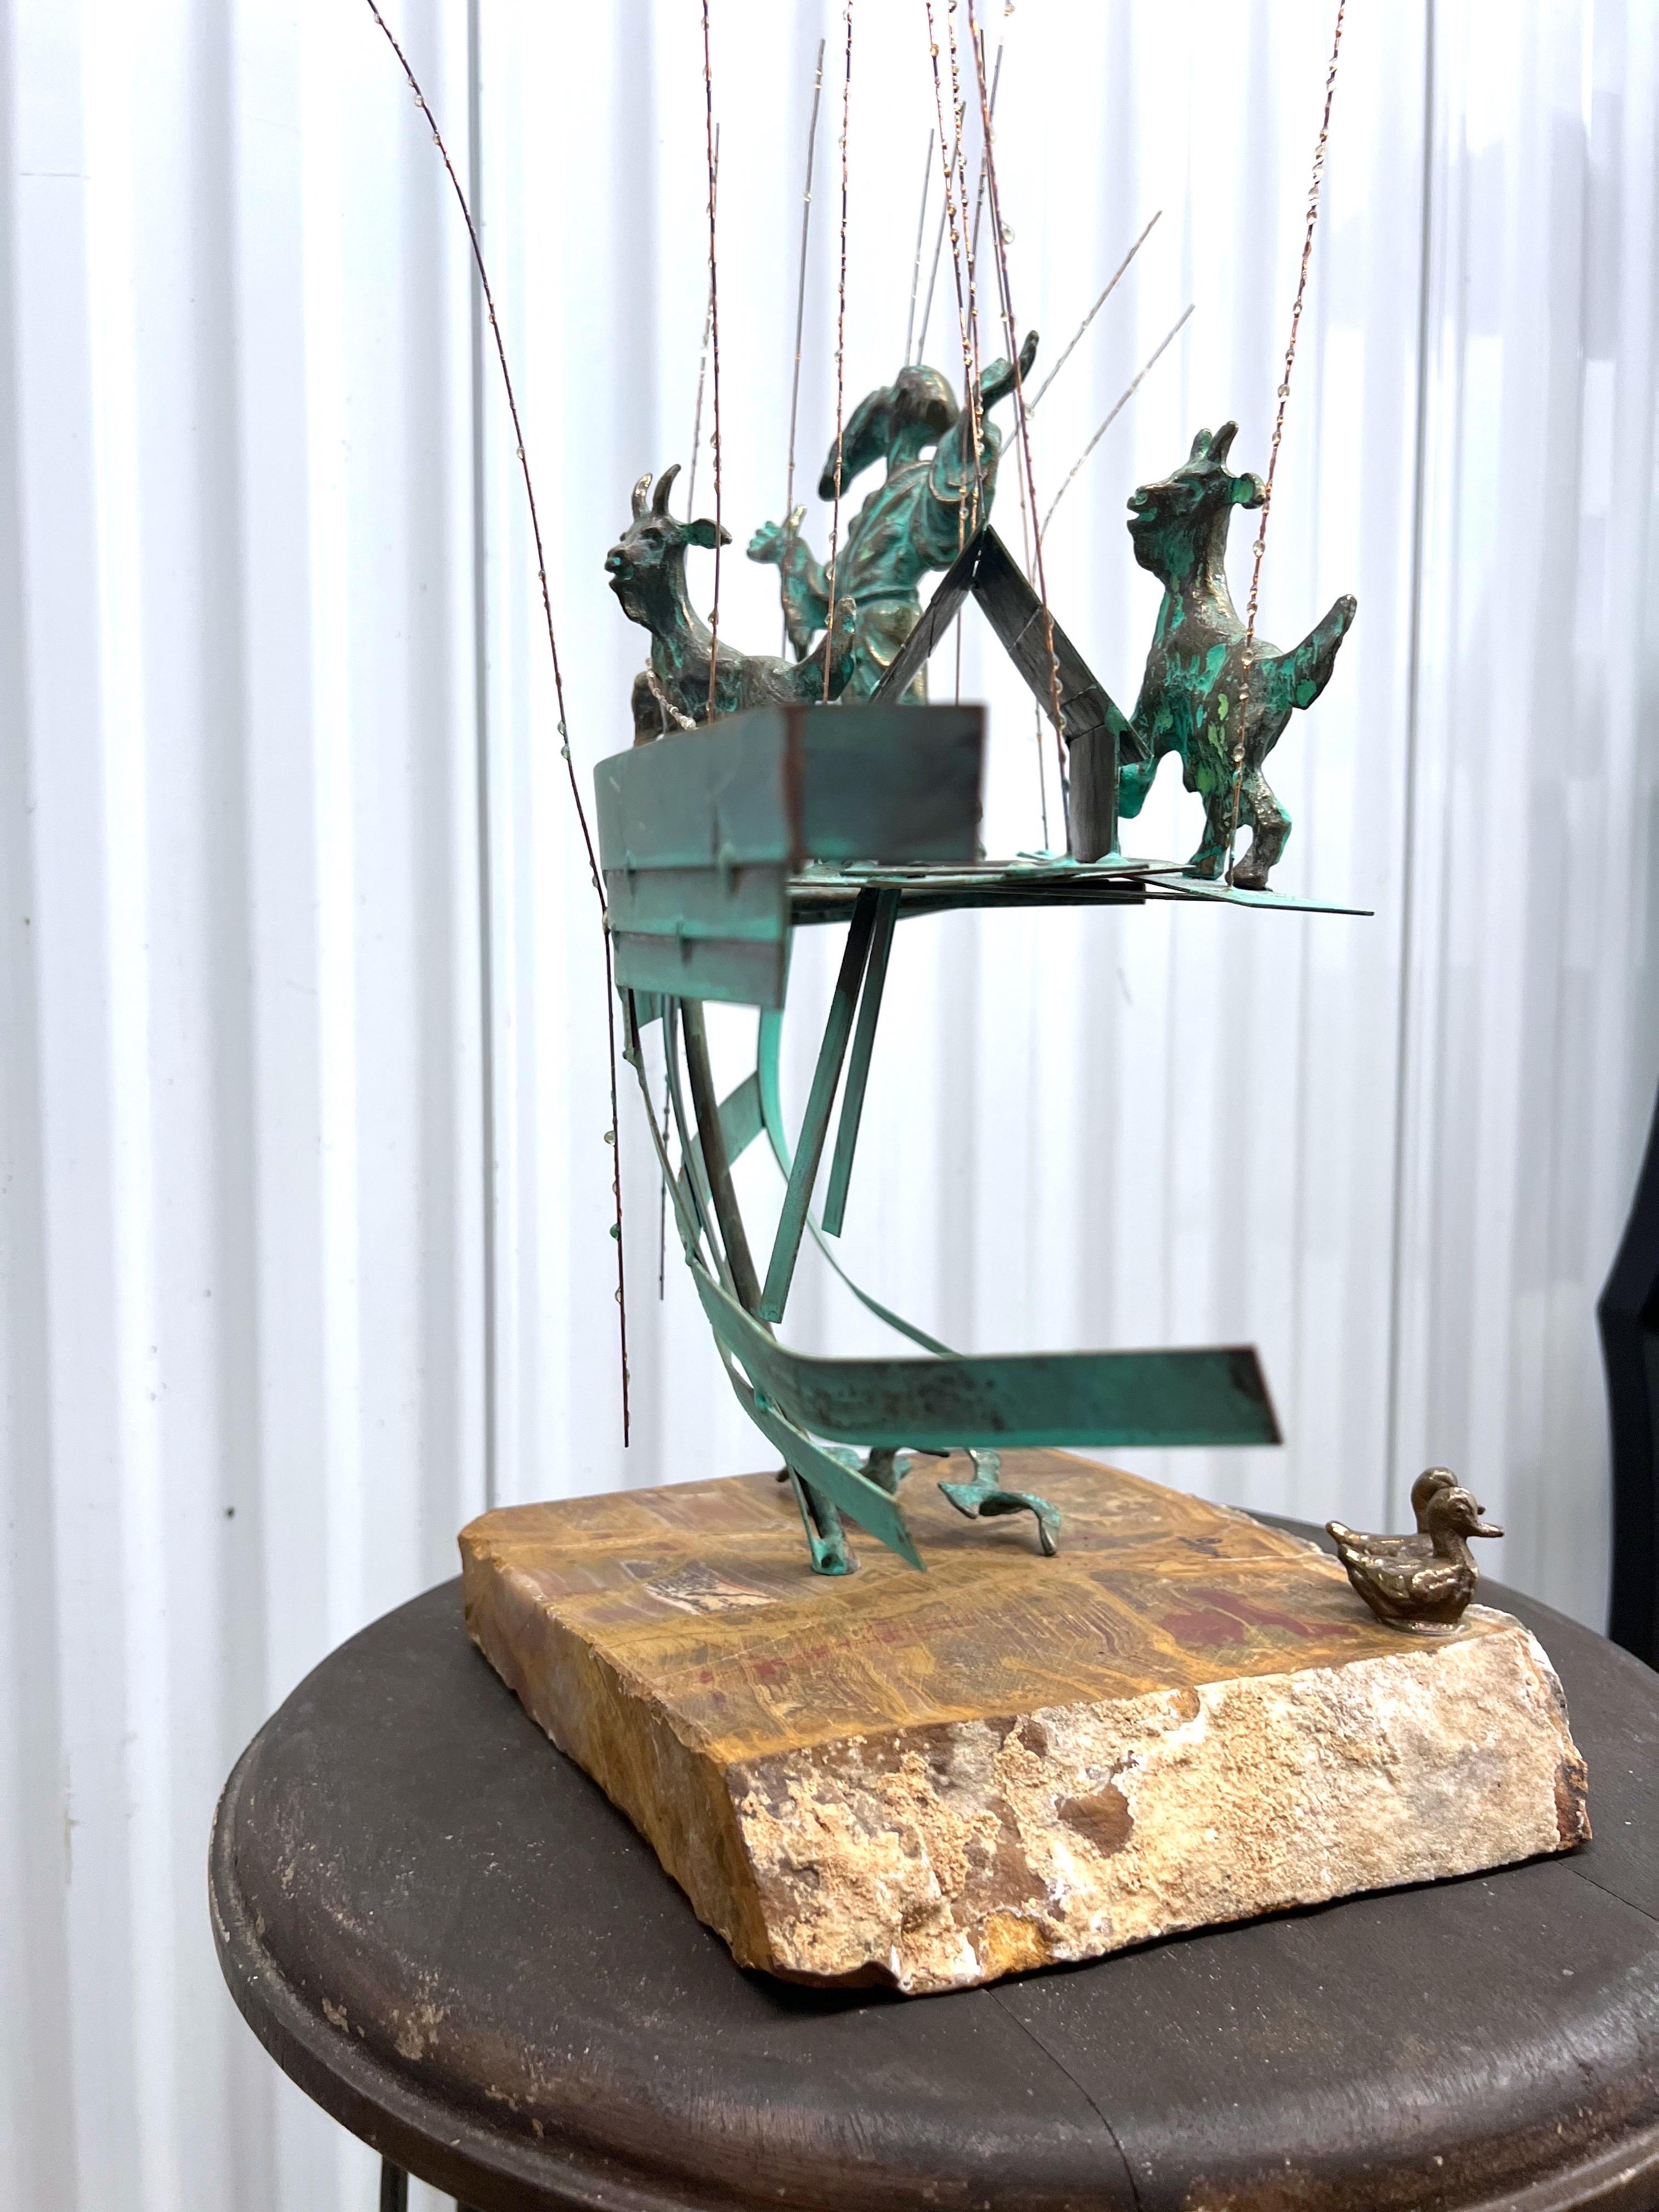 Bijan Signed Metal Art Sculpture of Man on Boat with Goats For Sale 7